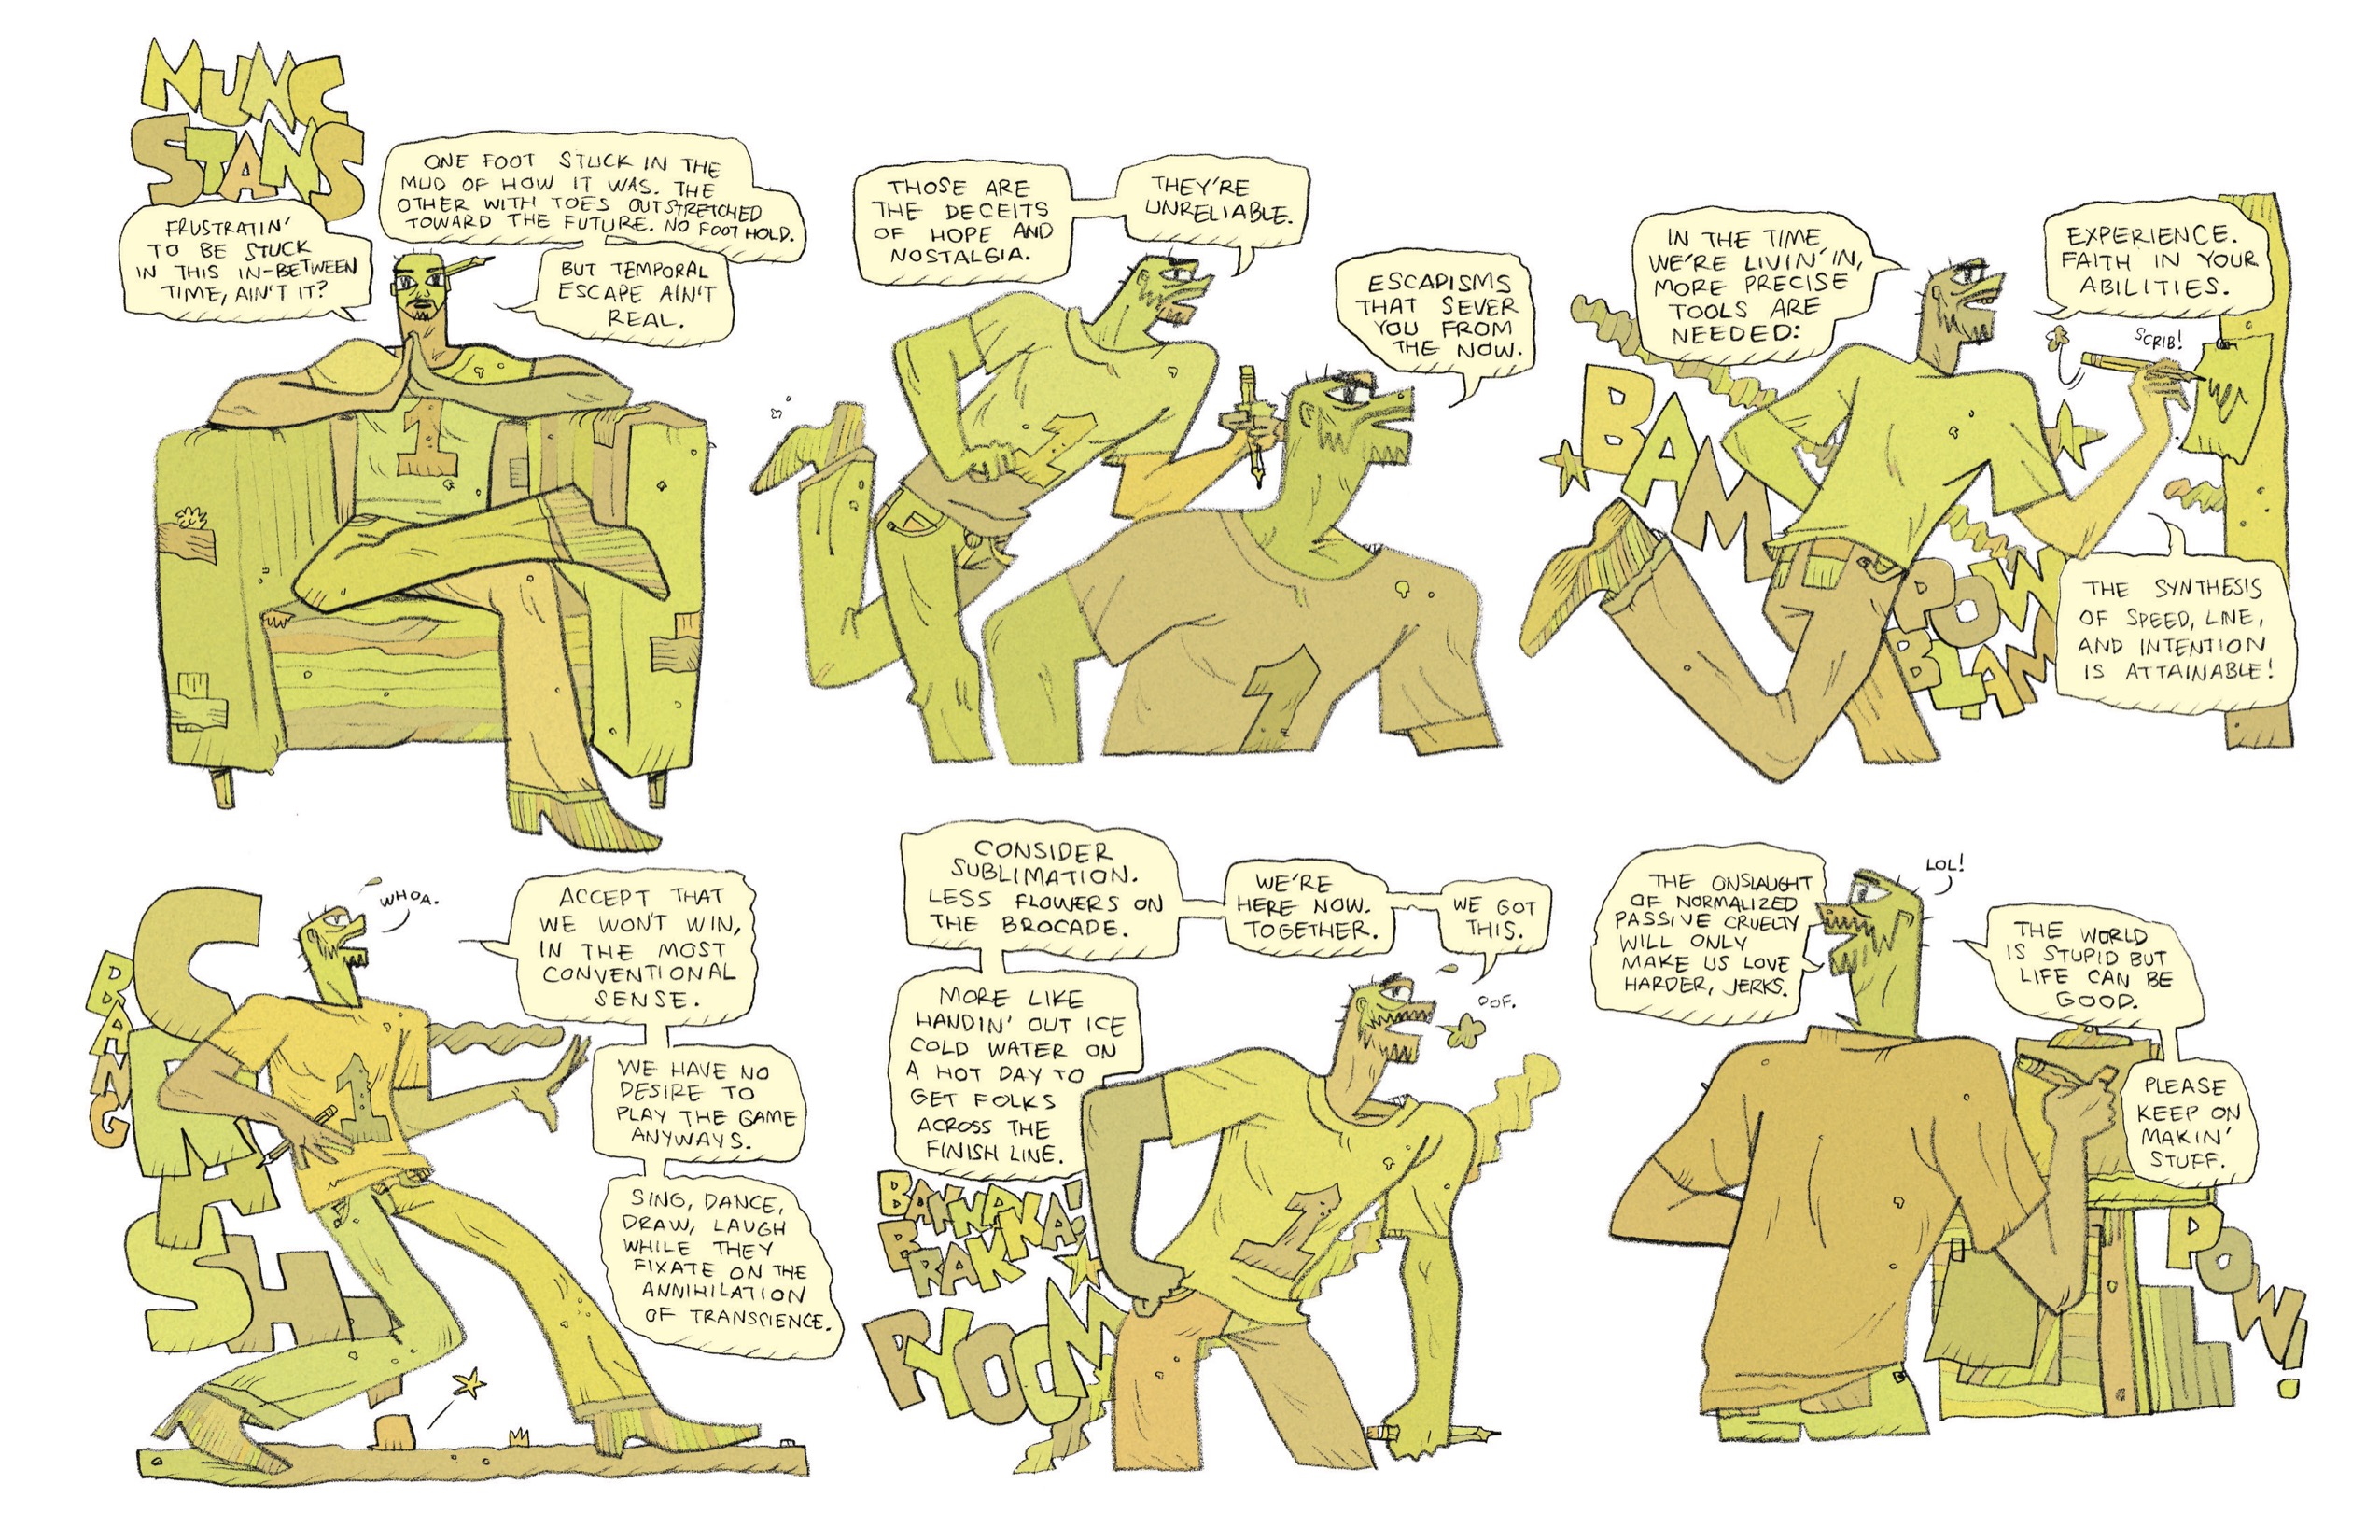 This comic deviates from the others in this collection in that there are six panels on the page rather than three, and they are colored in various shades of yellow and orange. It is titled in block letters, “Nunc Stans.”
1. Derek sits in his beat up armchair, looking ahead at the reader. He rests one ankle over his knee, and holds both hands together under his chin. He is wearing his regular outfit: his number 1 t-shirt, jeans, and heeled boots. There is a large pencil tucked behind his ear. He has a serious expression on his face as he begins his monologue, “Frustratin’ to be stuck in this in-between time, ain’t it? One foot stuck in the mud of how it was. The other with toes outstretched toward the future. No foothold. But temporal escape ain’t real. 
2. Derek is drawn twice in this panel. In the first, he is running dramatically, facing the right of the page. He is now gripping the pencil in his left hand as he charges forward, one leg kicked back as high as his waist. He says, “Those are the receipts of hope and nostalgia. They’re unreliable.” We then zoom in a bit closer on Derek, so we just see him from the elbows up. His brows are furrowed now as he continues, “Escapisms that sever you from the now.”
3. Now from slightly behind, we see Derek running still charging forward, now aiming his pencil for a sheet of paper nailed to a post in front of him. His mouth is open wider now, as if he’s talking louder. In the background are lines of smoke and the sounds of explosions: “BAM! POW! BLAM!” Derek continues, “In the time we’re livin’ in, more precise tools are needed: Experience. Faith in your abilities. The synthesis of speed, line, and intention is attainable!” 
4. Derek stops running, now standing with his weight leaning backwards, as if stopped suddenly and standing back in fear of something ahead of him. He is leaning against large block letters, stacked vertically the same height as Derek: “BANG! CRASH!” He is looking up, eyes wide and mouth agape. He sweats and lets out a “whoa.” then continues his monologue, “Accept that we won’t win, in the most conventional sense. We have no desire to play the game anyways. Sing, dance, draw, laugh while they fixate on the annihilation of transience.” 
5. Derek now leans his weight forward, bending over slightly and huffing out in exhaustion, “Oof.” He grips his pencil in his left hand at his side; his right hand is on his hip. Behind him, loud noises continue: “BAKKA BRAKKA! PYOOM” A line of smoke stretches out diagonally behind him. He says, “Consider sublimation. Less flowers on the brocade. More like handin’ out ice cold water on a hot day to get folks across the finish line. We’re here now. Together. We got this.”
6. From behind, we see Derek standing in front of an easel-like structure, with a paper clipped upright to a clipboard, and two sheets of paper taped below it on a wooden base. He turns his head to the side, looking slightly behind him. Smiling, he says, “The onslaught of normalized passive cruelty will only make us love harder, jerks. LOL! The world is stupid but life can be good. Please keep on makin’ stuff.” In the background is a lone “POW!” 